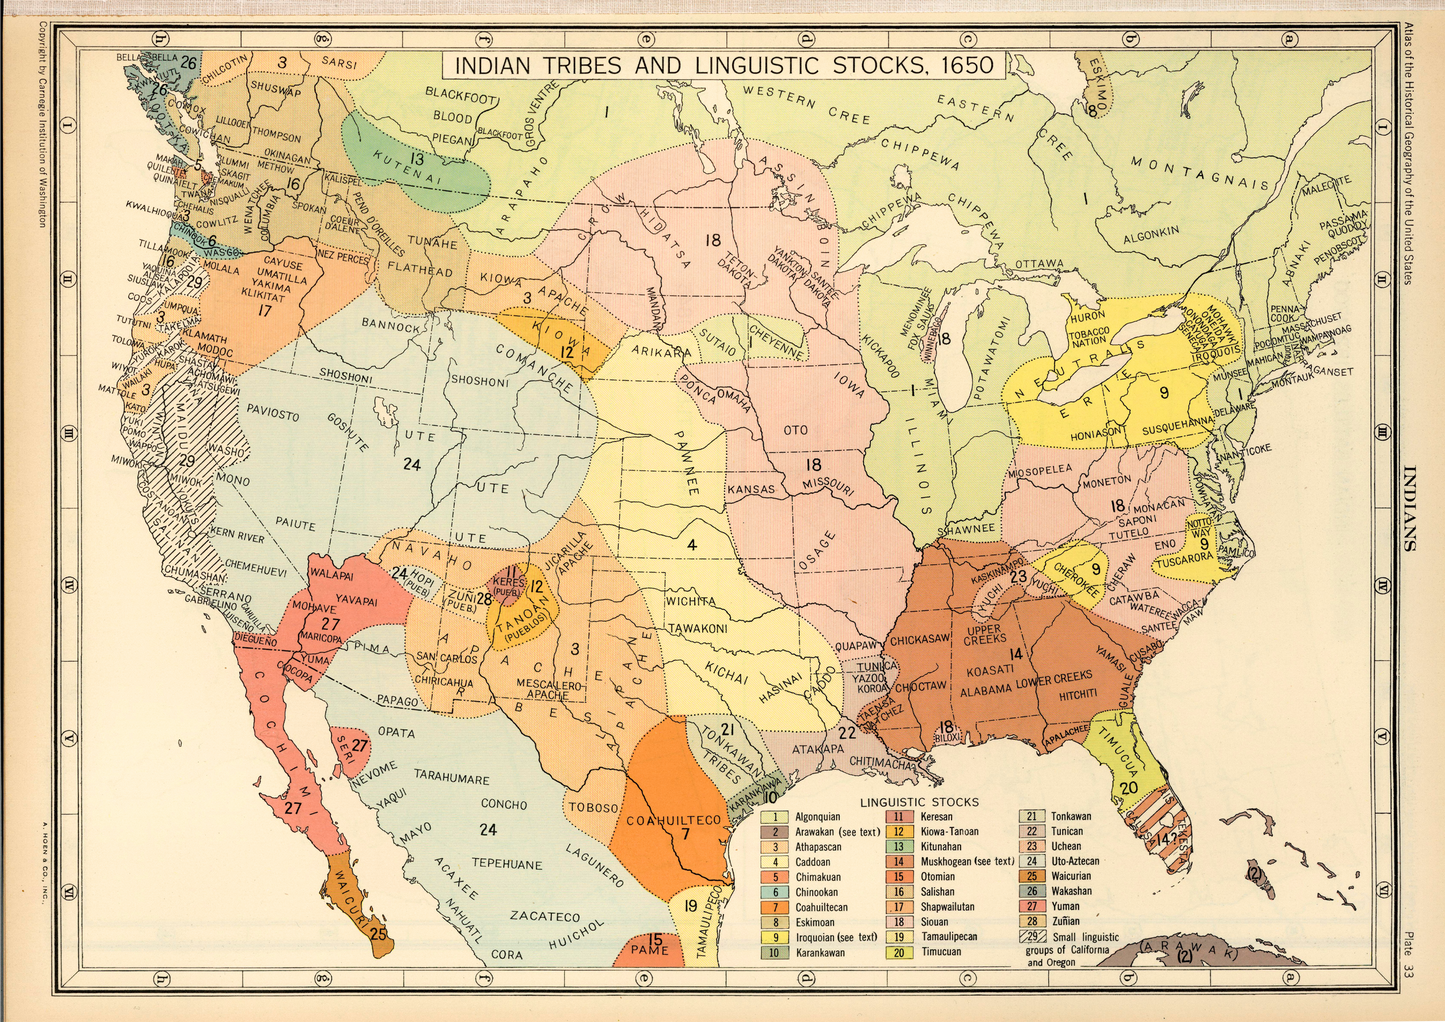 United States Indian Tribes in 1650